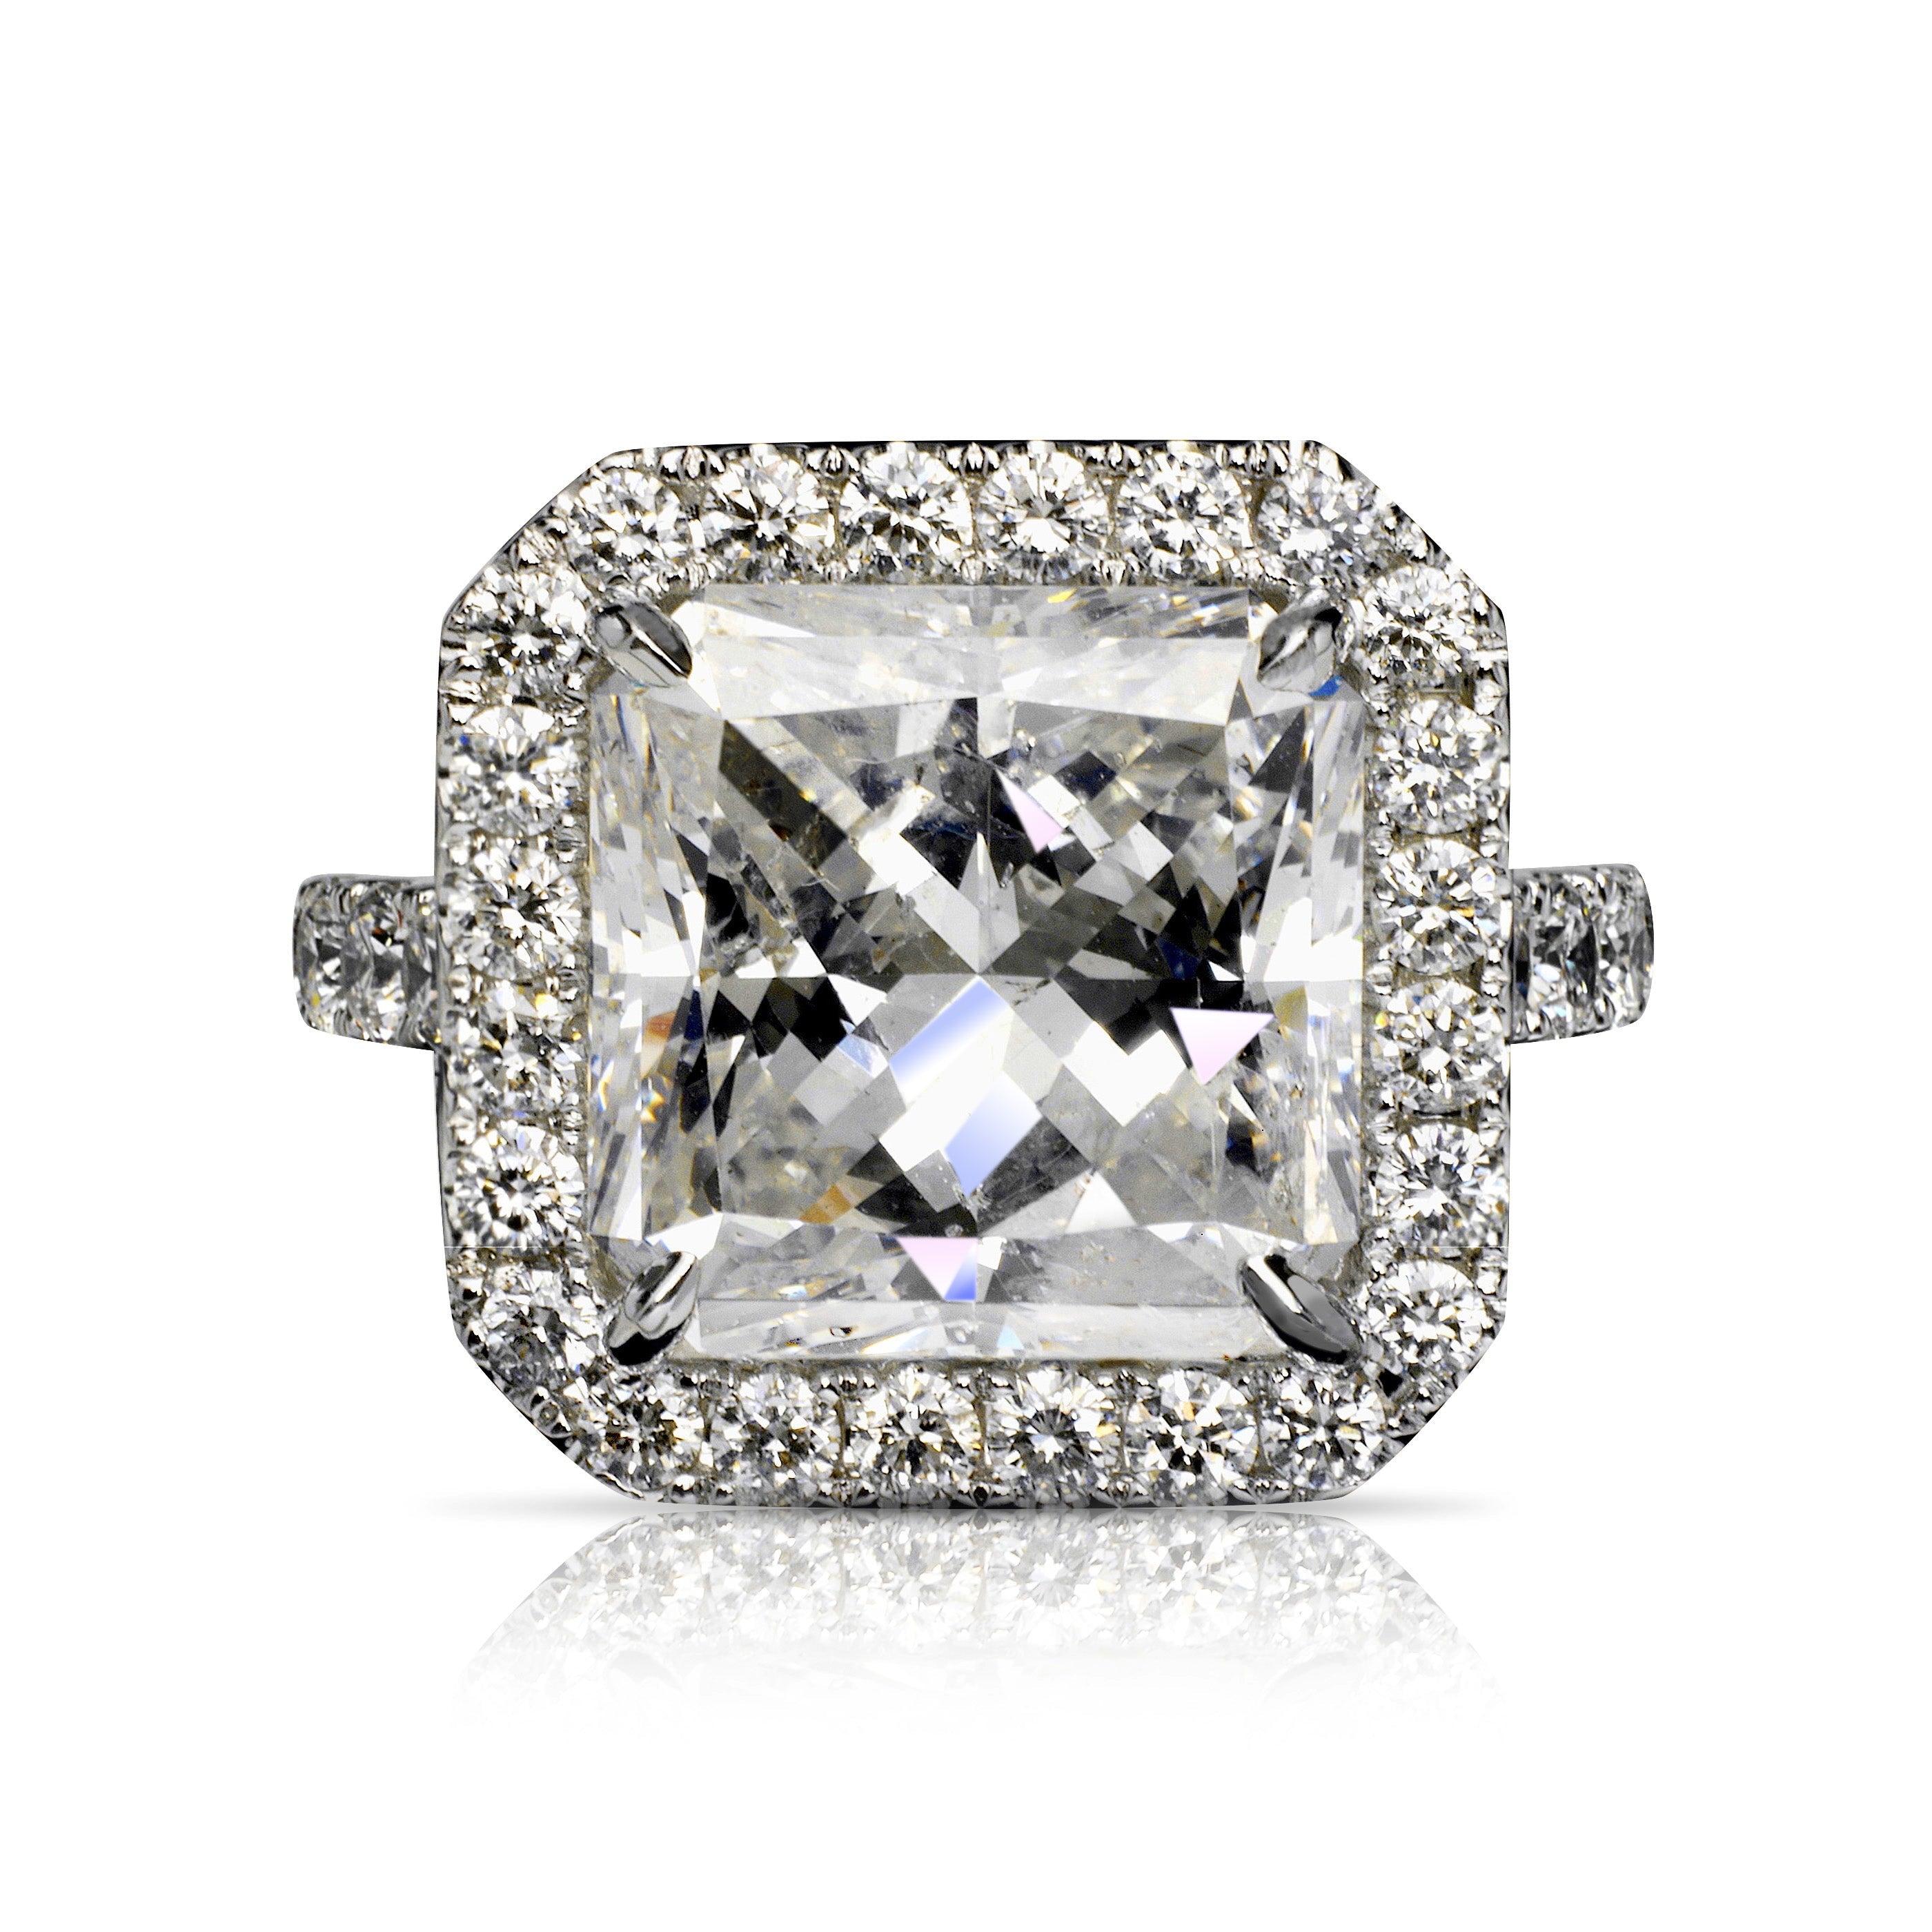 SKY RADIANT CUT HALO DIAMOND ENGAGEMENT RING PLATINUM BY MIKE NEKTA
CERTIFIED

Center Diamond:
Carat Weight: 10.45 Carats
Color :  E
Clarity: SI1*
Style:  RADIANT BRILLIANT
Measurements: 12.03 x 11.99 x 8.66 mm
* Clarity Enhanced
 
Ring:
Metal: 18K